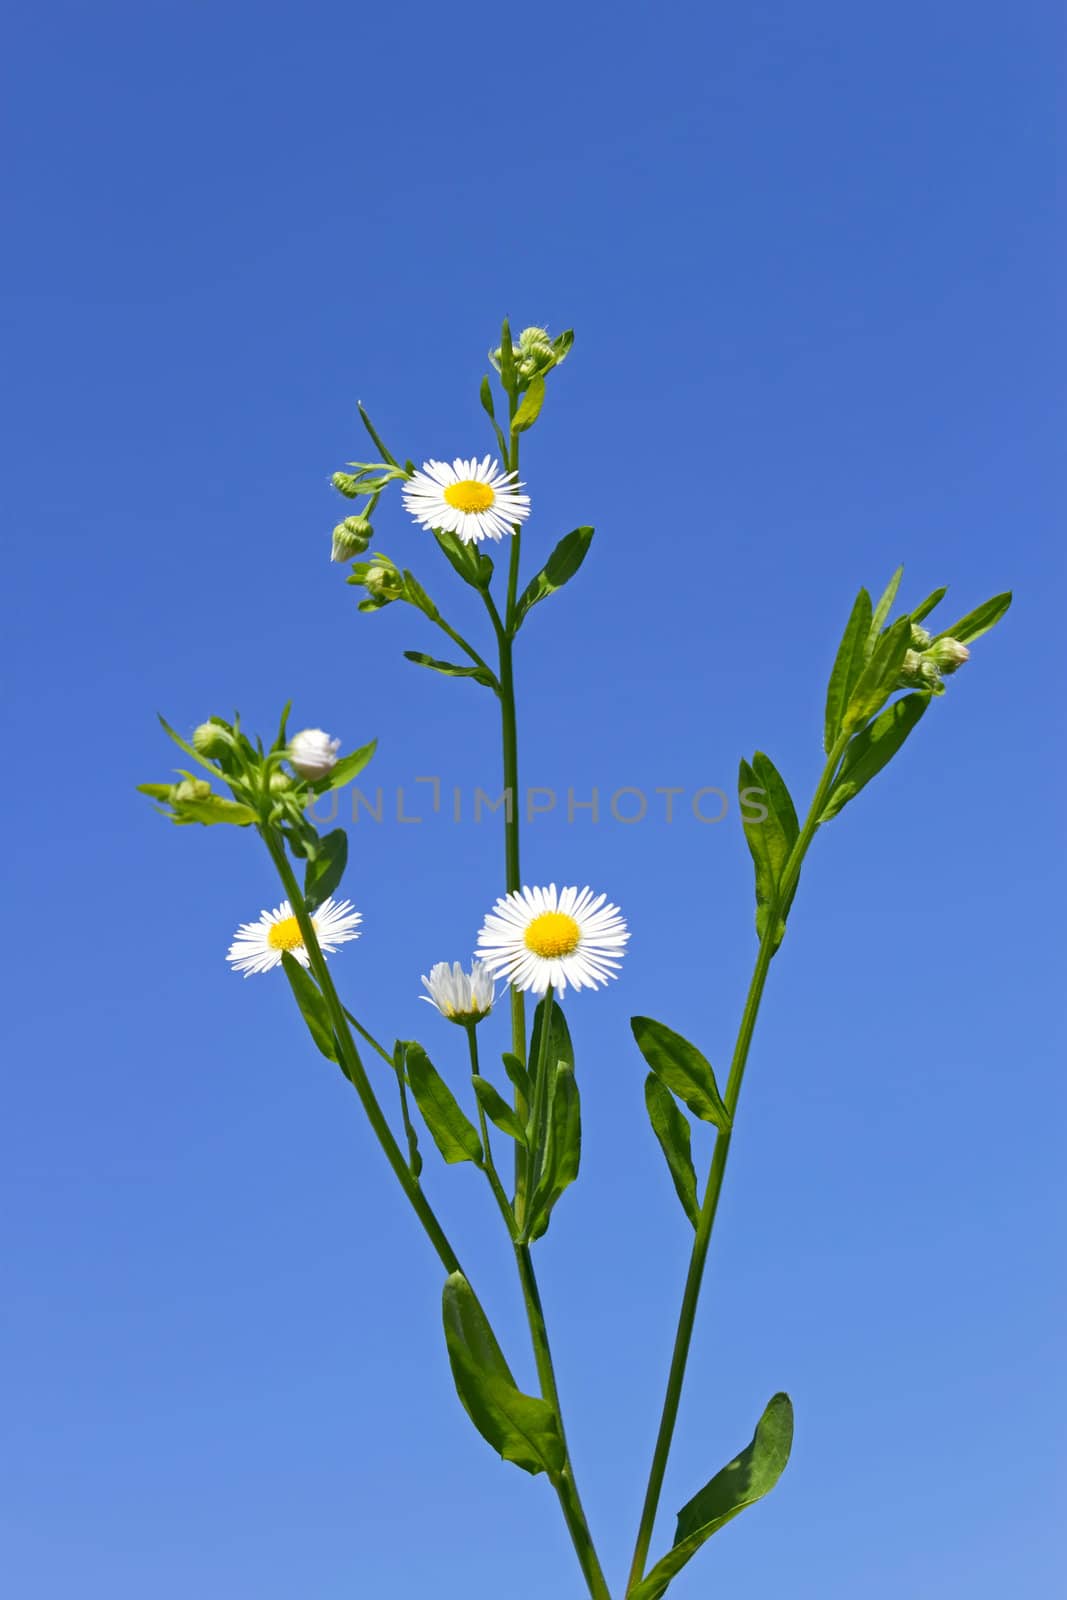 Plant of daisies against a background of a blue sky